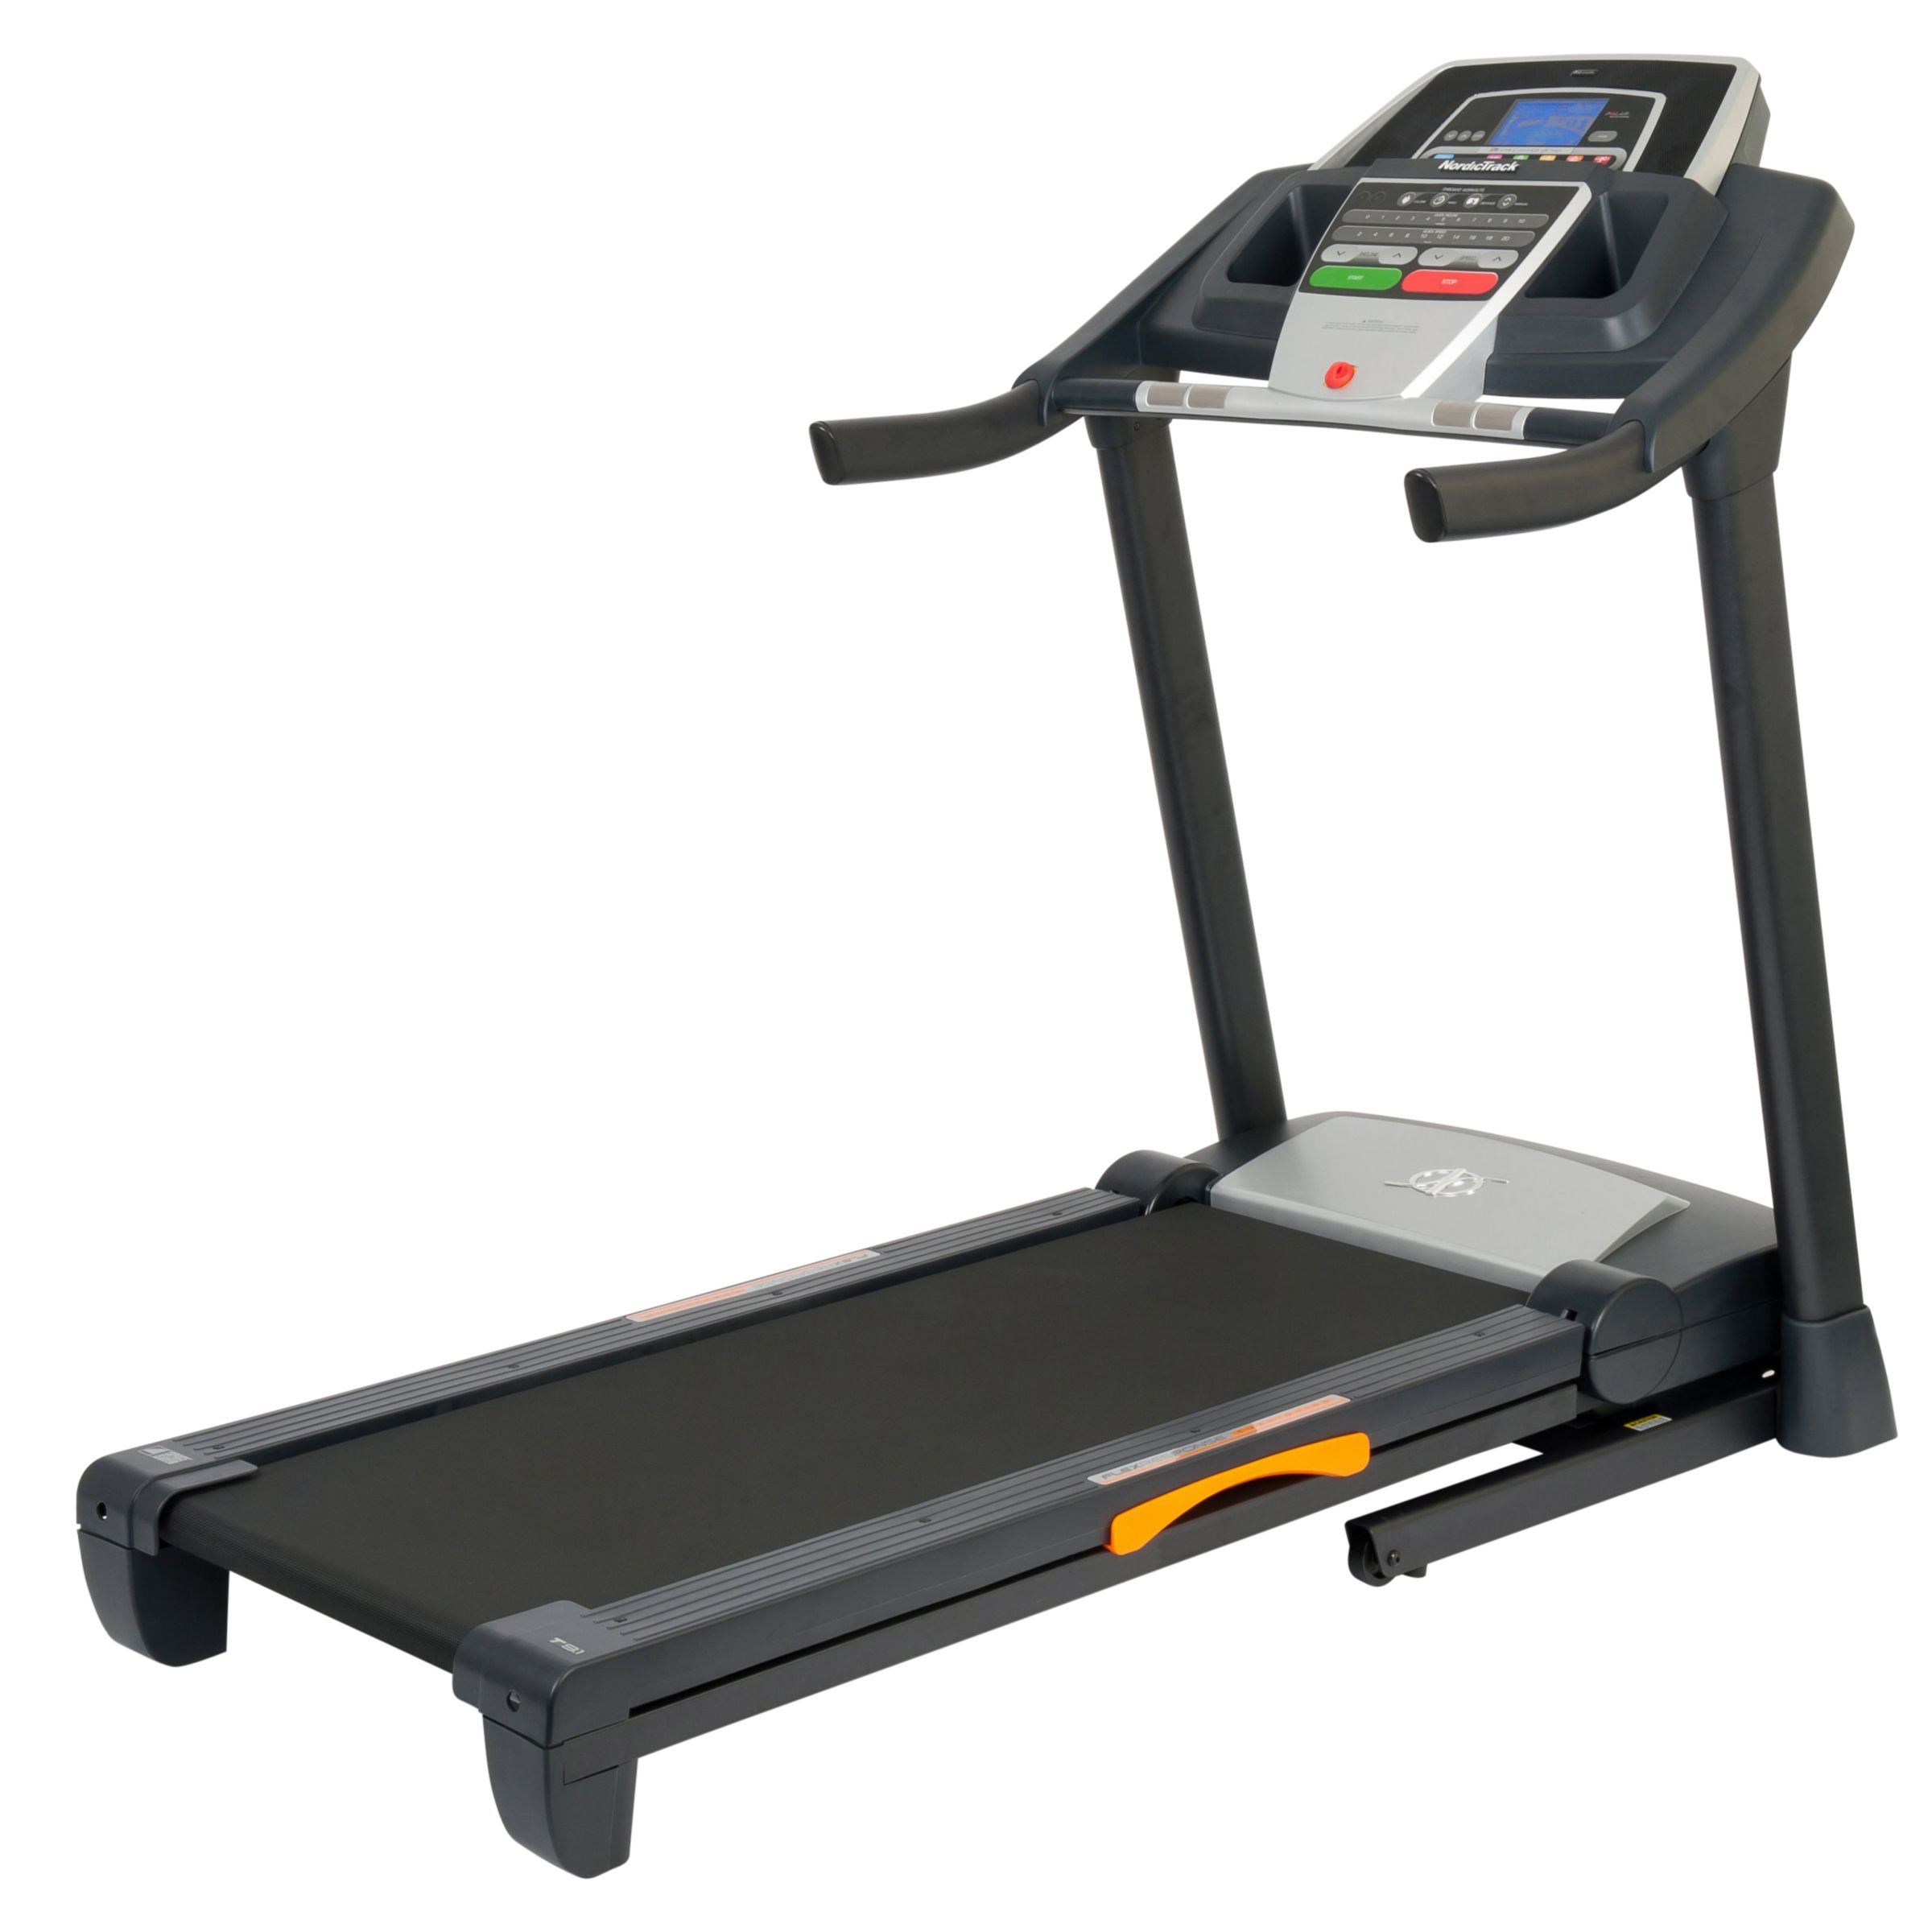 NordicTrack T9.1 Folding Treadmill with iFit Live